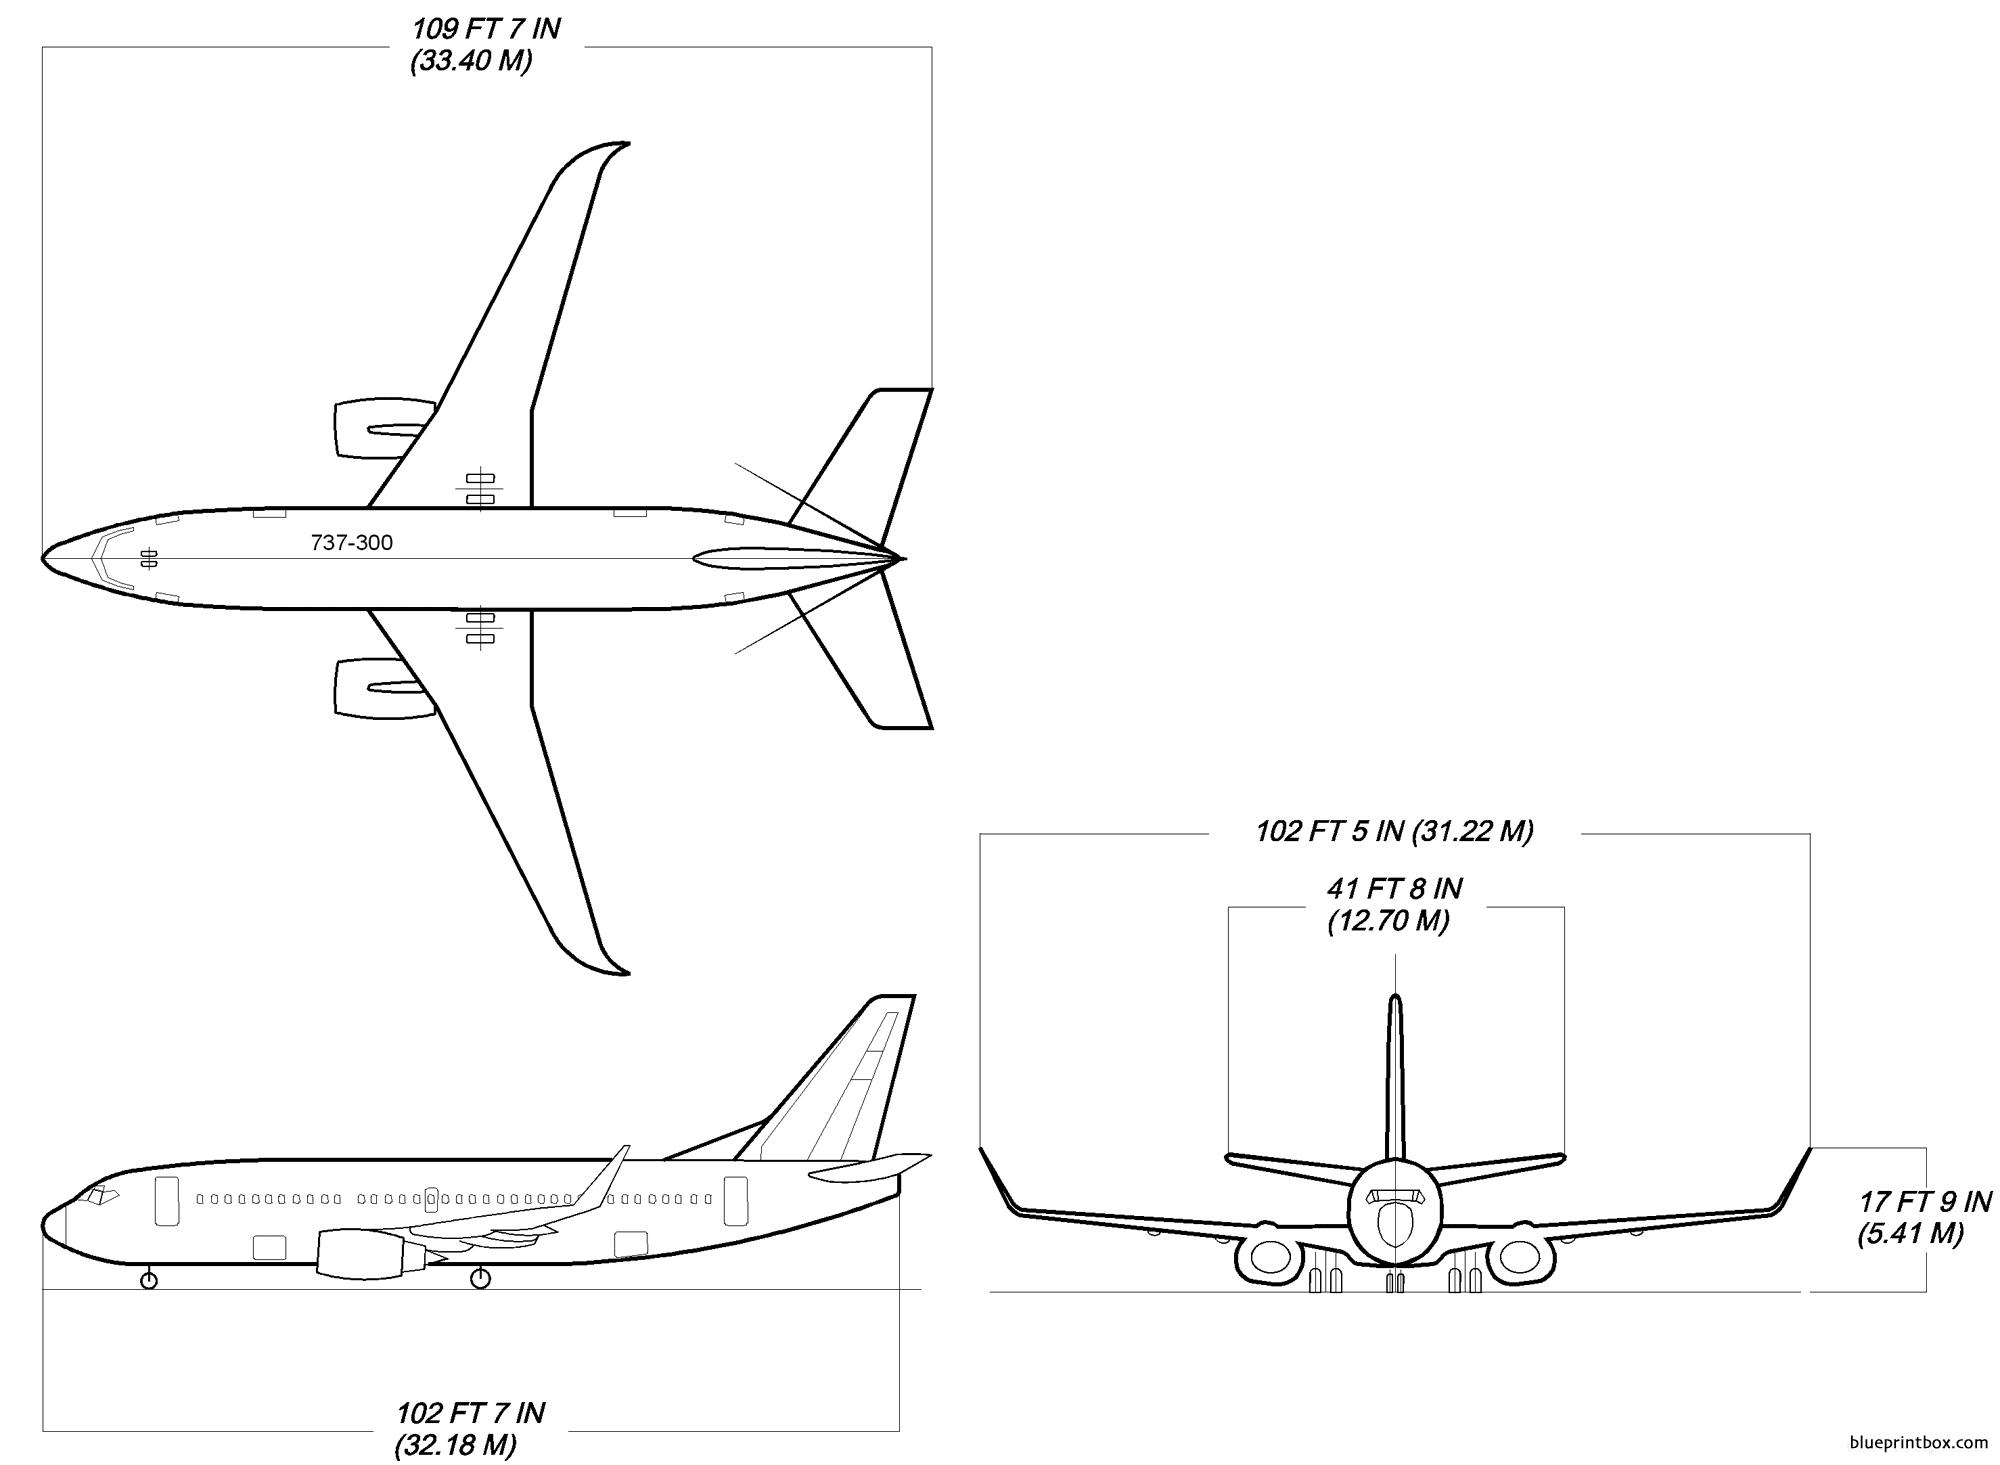 boeing 737 300w - BlueprintBox.com - Free Plans and Blueprints of Cars